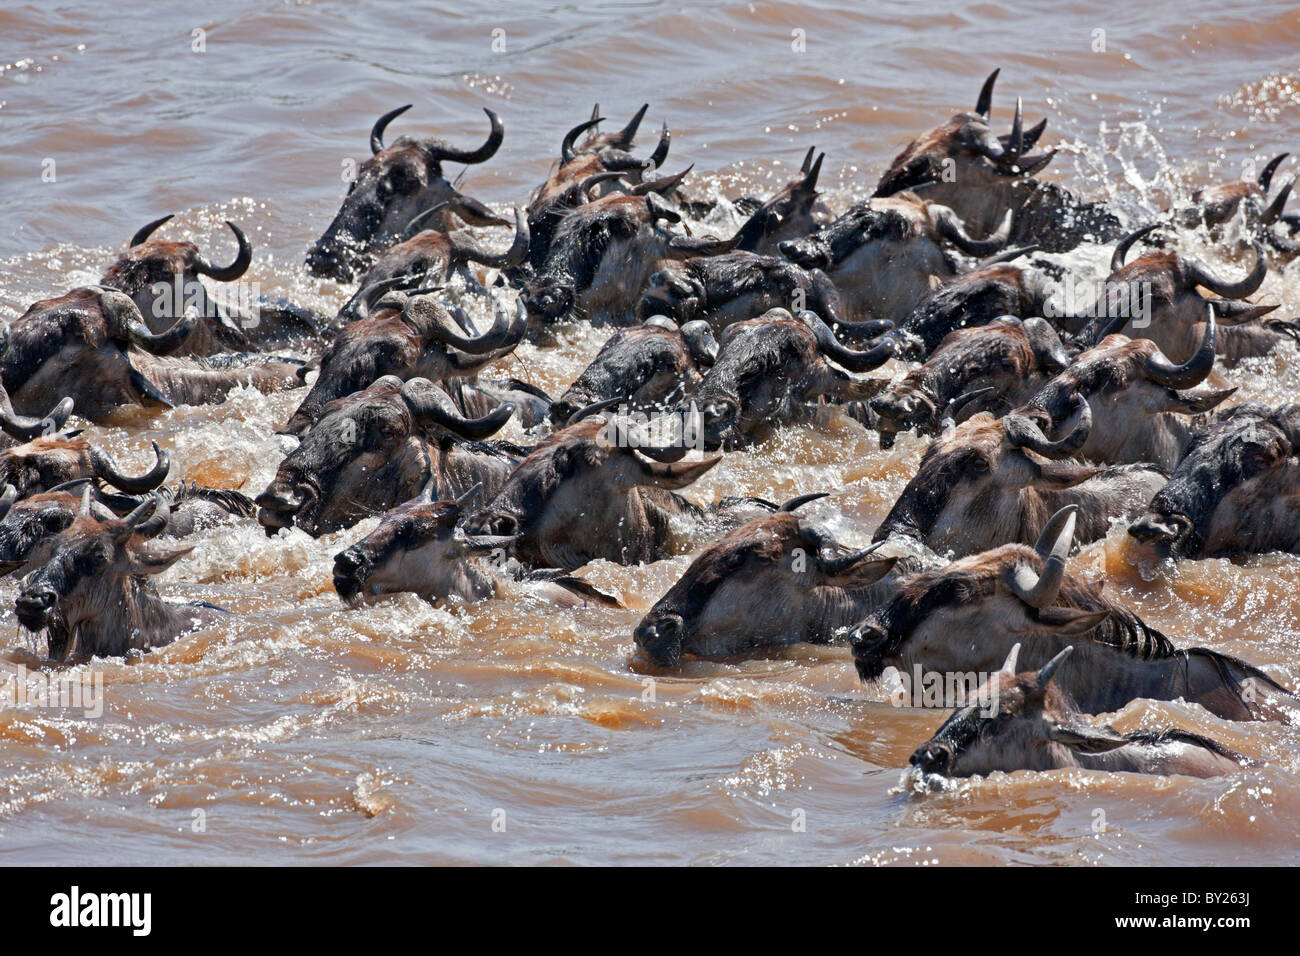 Wildebeest swimming across the Mara River during their annual migration from the Serengeti National Park in Northern Tanzania Stock Photo